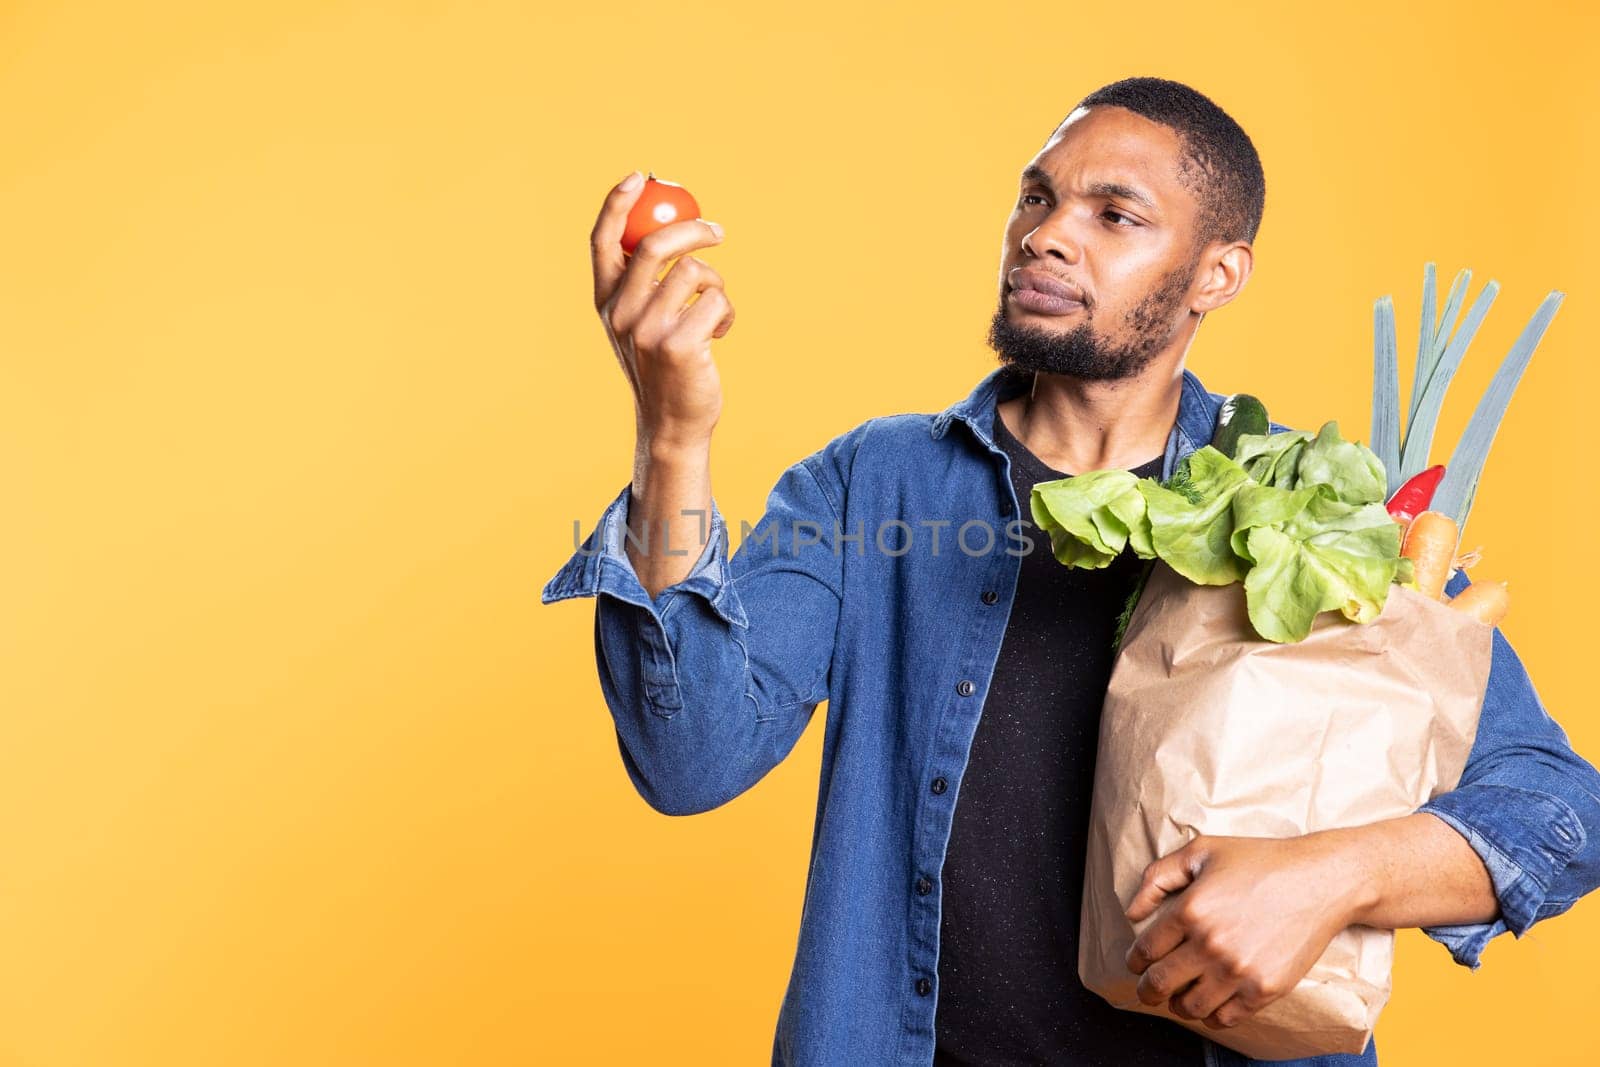 Vegan male person admiring a fresh ethically sourced tomato and smelling the fresh aroma in studio, holding a bag of eco friendly bulk products. Zero waste sustainable lifestyle.